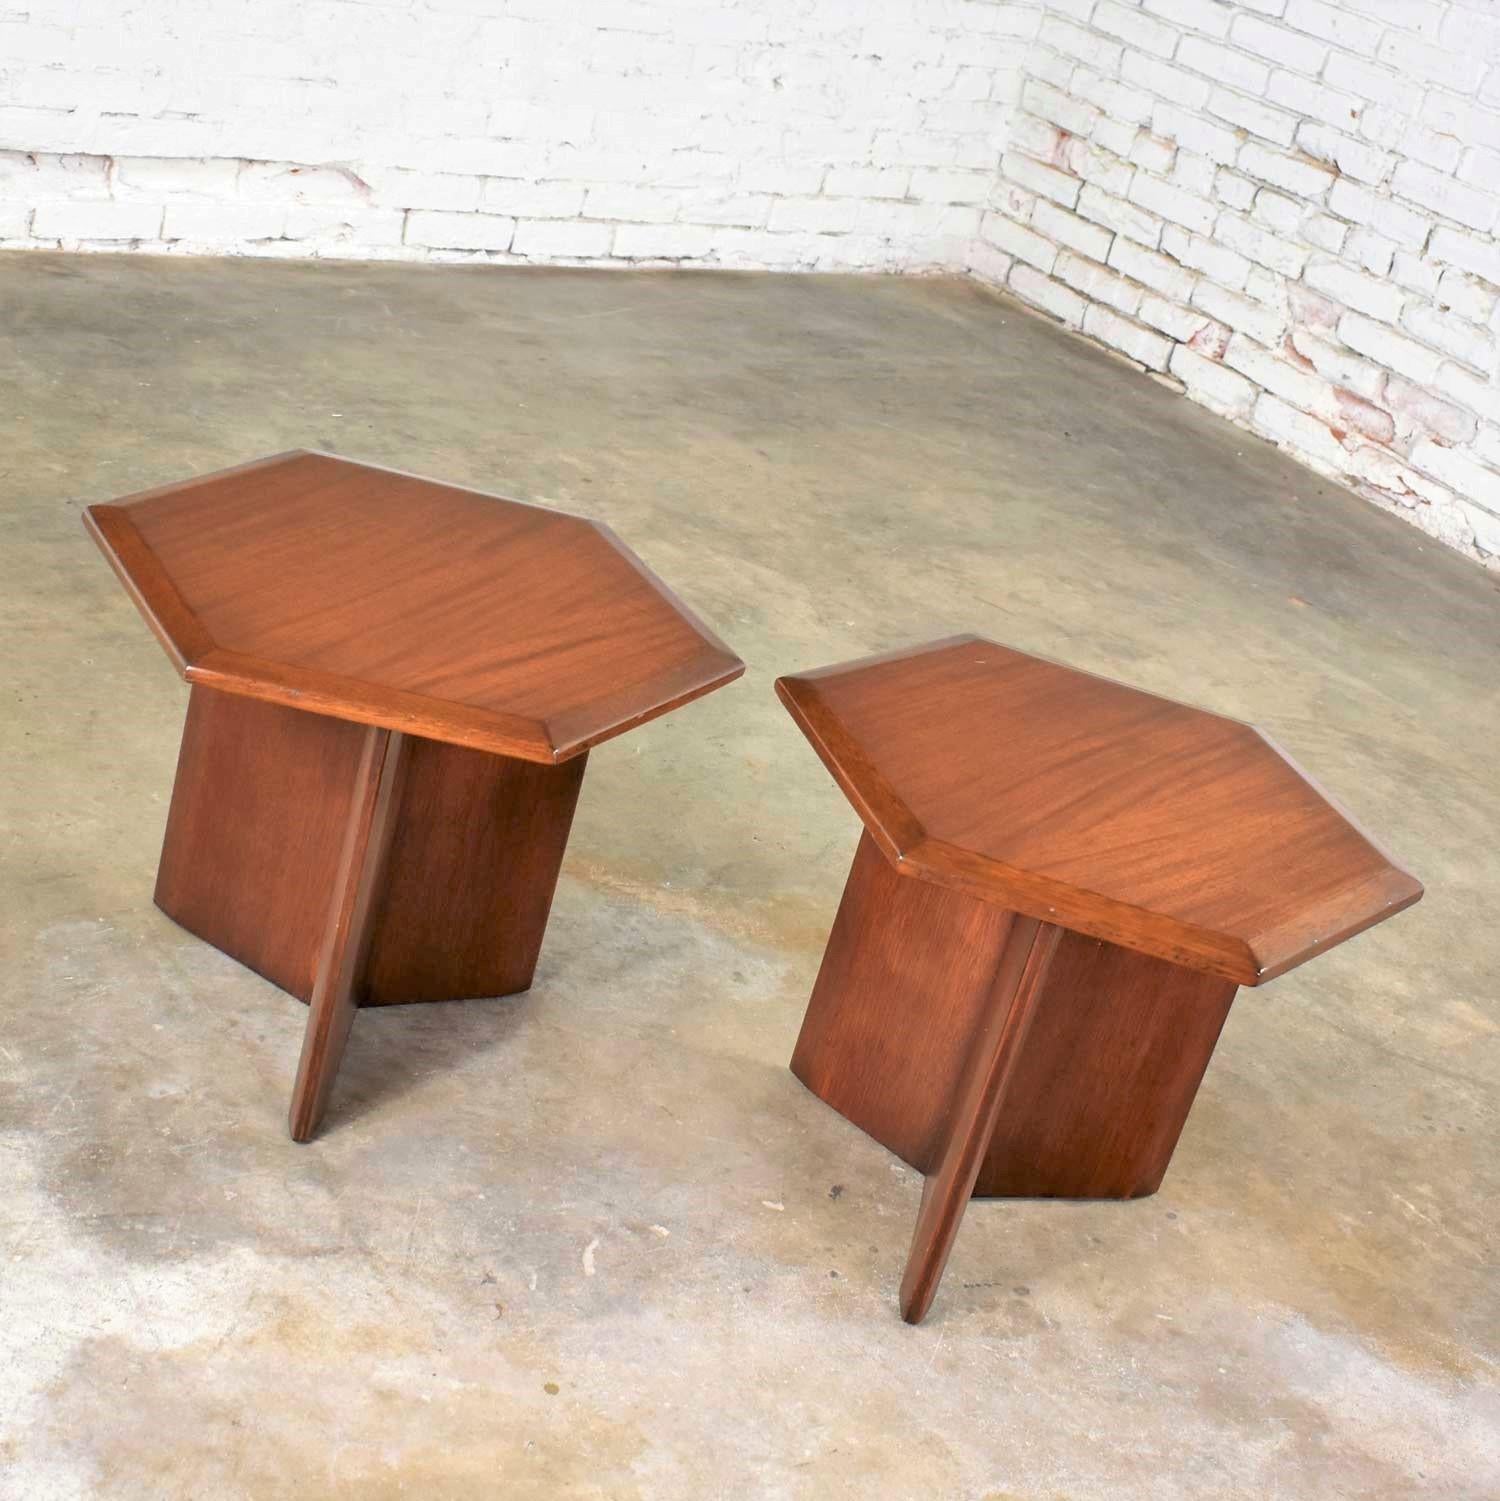 Handsome vintage pair of walnut stained mahogany hexagon side tables or end tables custom made in the style of Frank Lloyd Wright for Henredon and their Taliesin Collection. They are in fabulous vintage condition with no outstanding flaws. Please